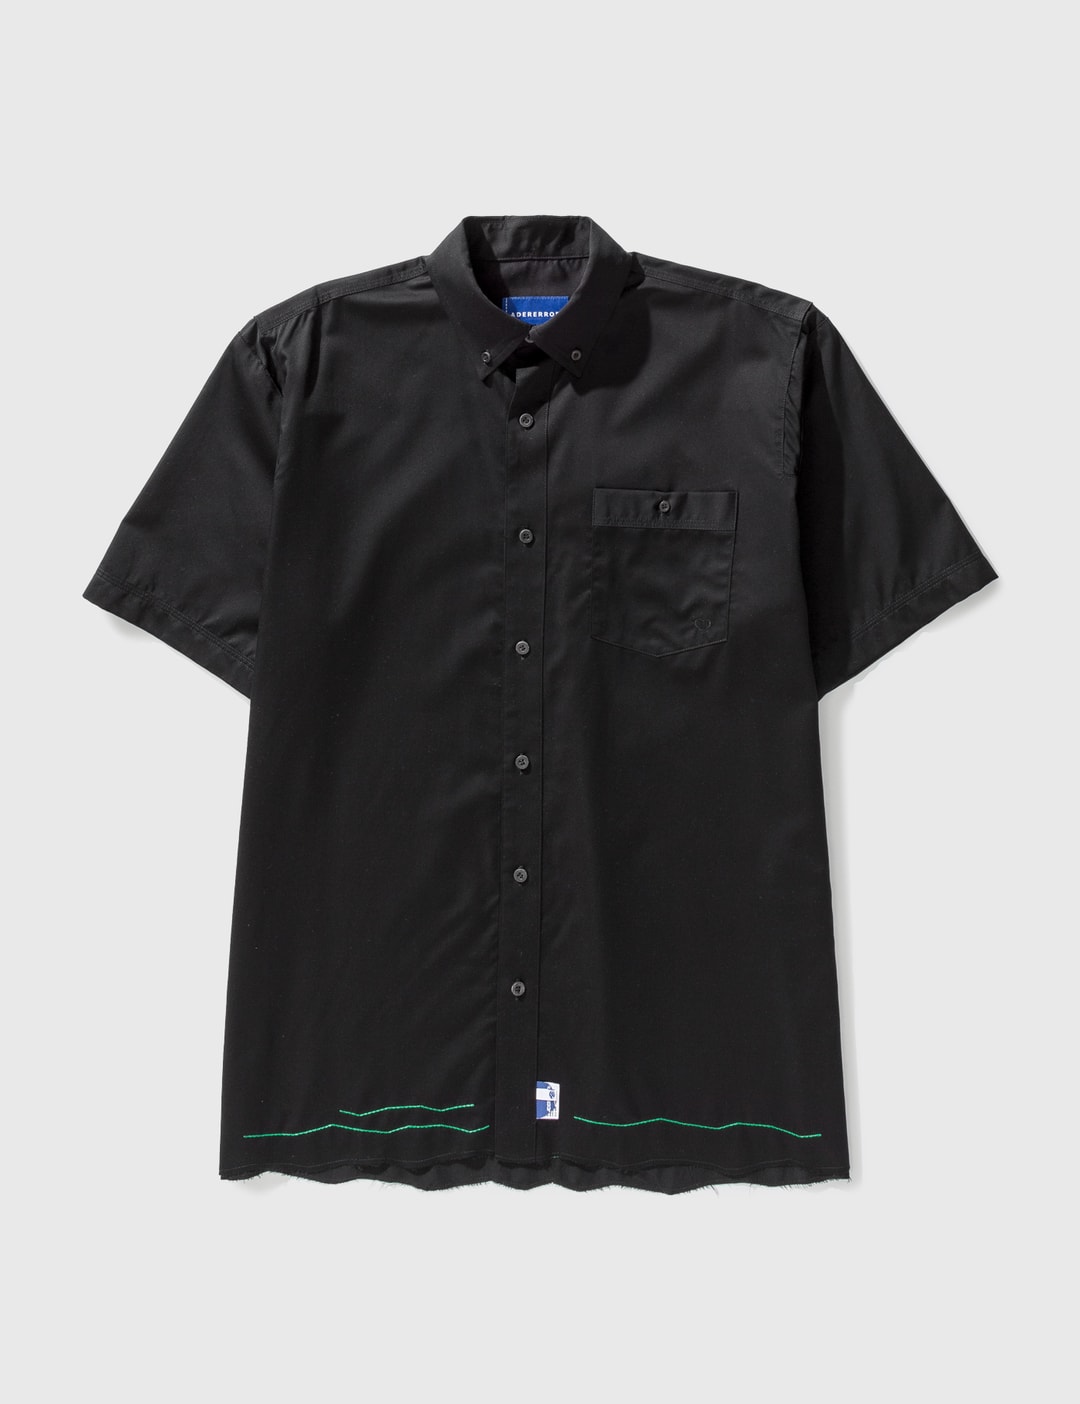 Ader Error - SHIRT | HBX - Globally Curated and Lifestyle by Hypebeast